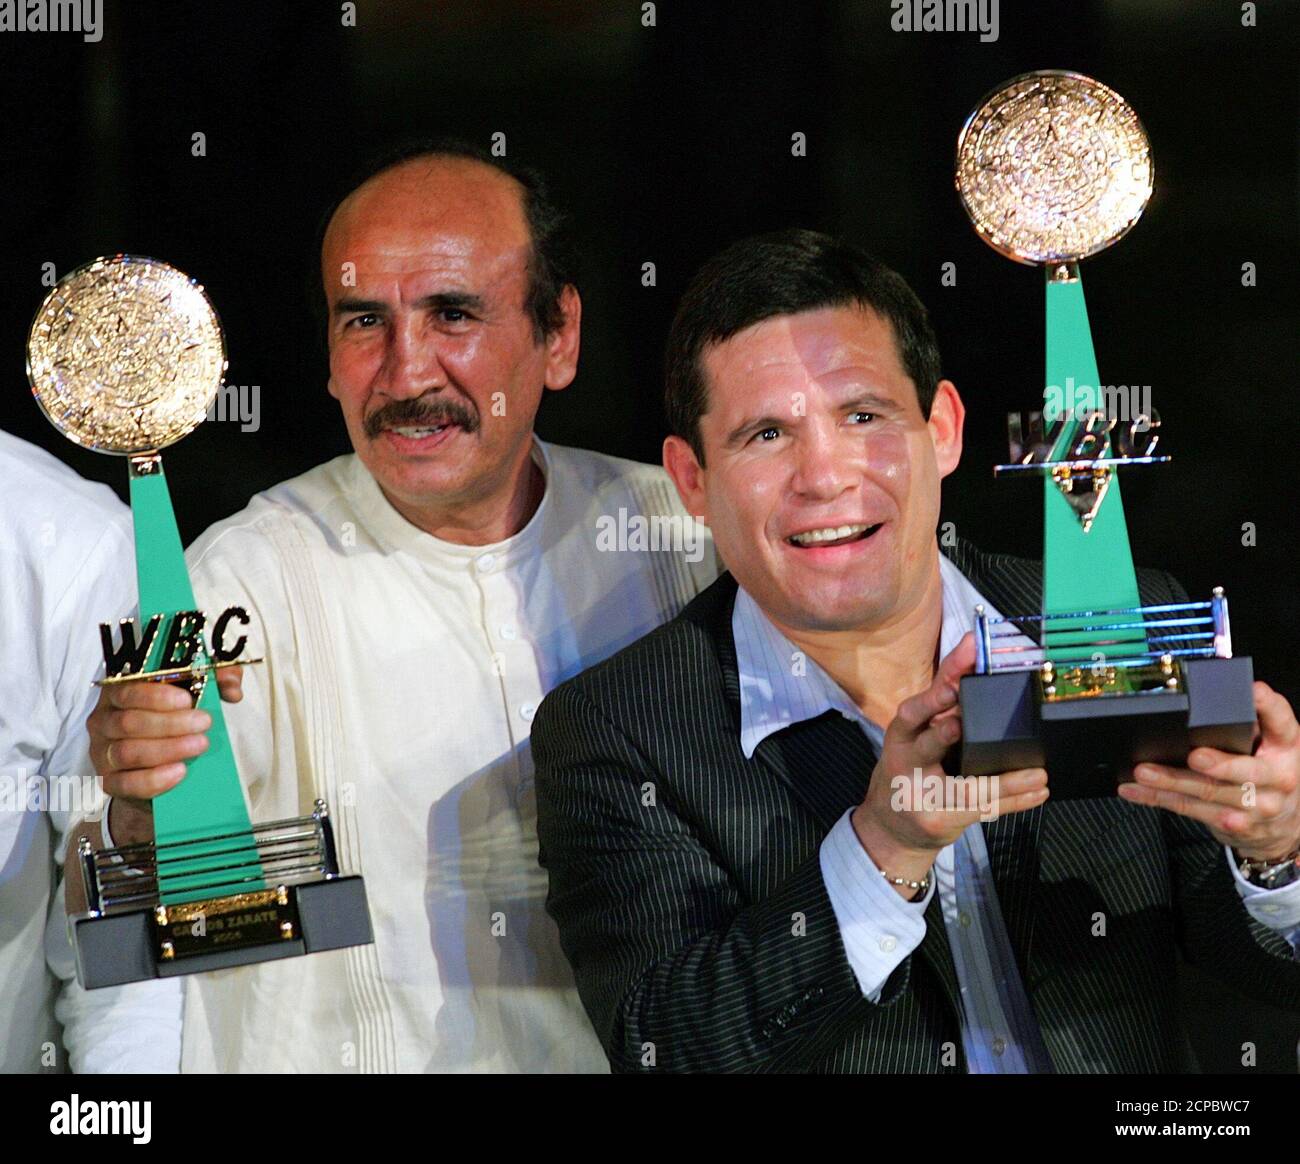 Former boxer Julio Cesar Chavez from Mexico (R) and compatriot Carlos Zarate  hold up their trophy at the World Boxing Council, "WBC's Night of Champions  Event" at the Xcaret park in Cancun